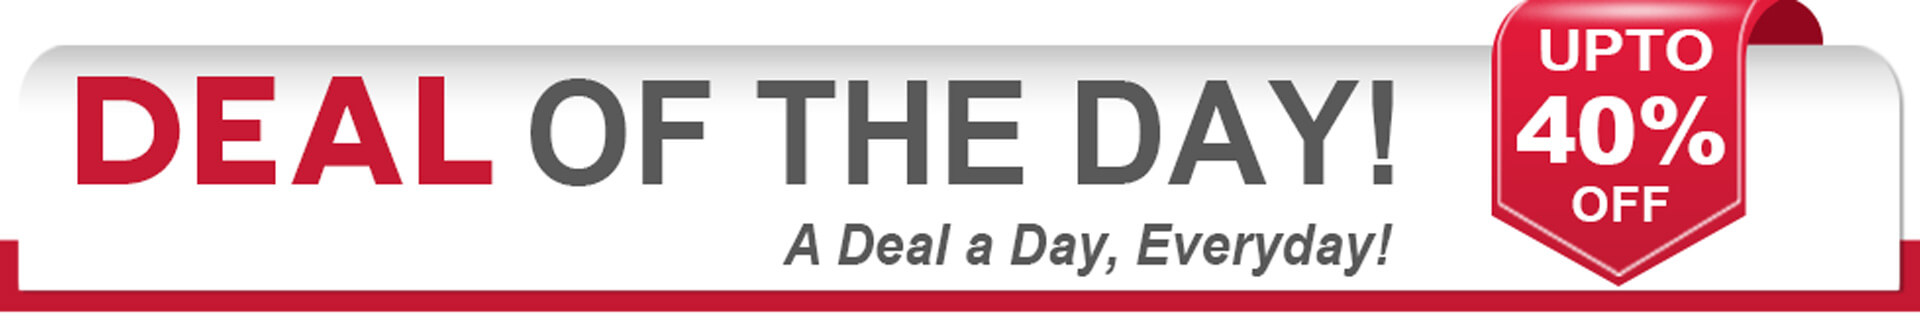 Printing Deal of the Day | Cheap Printing Toronto Mississauga | Print Den  Inc.